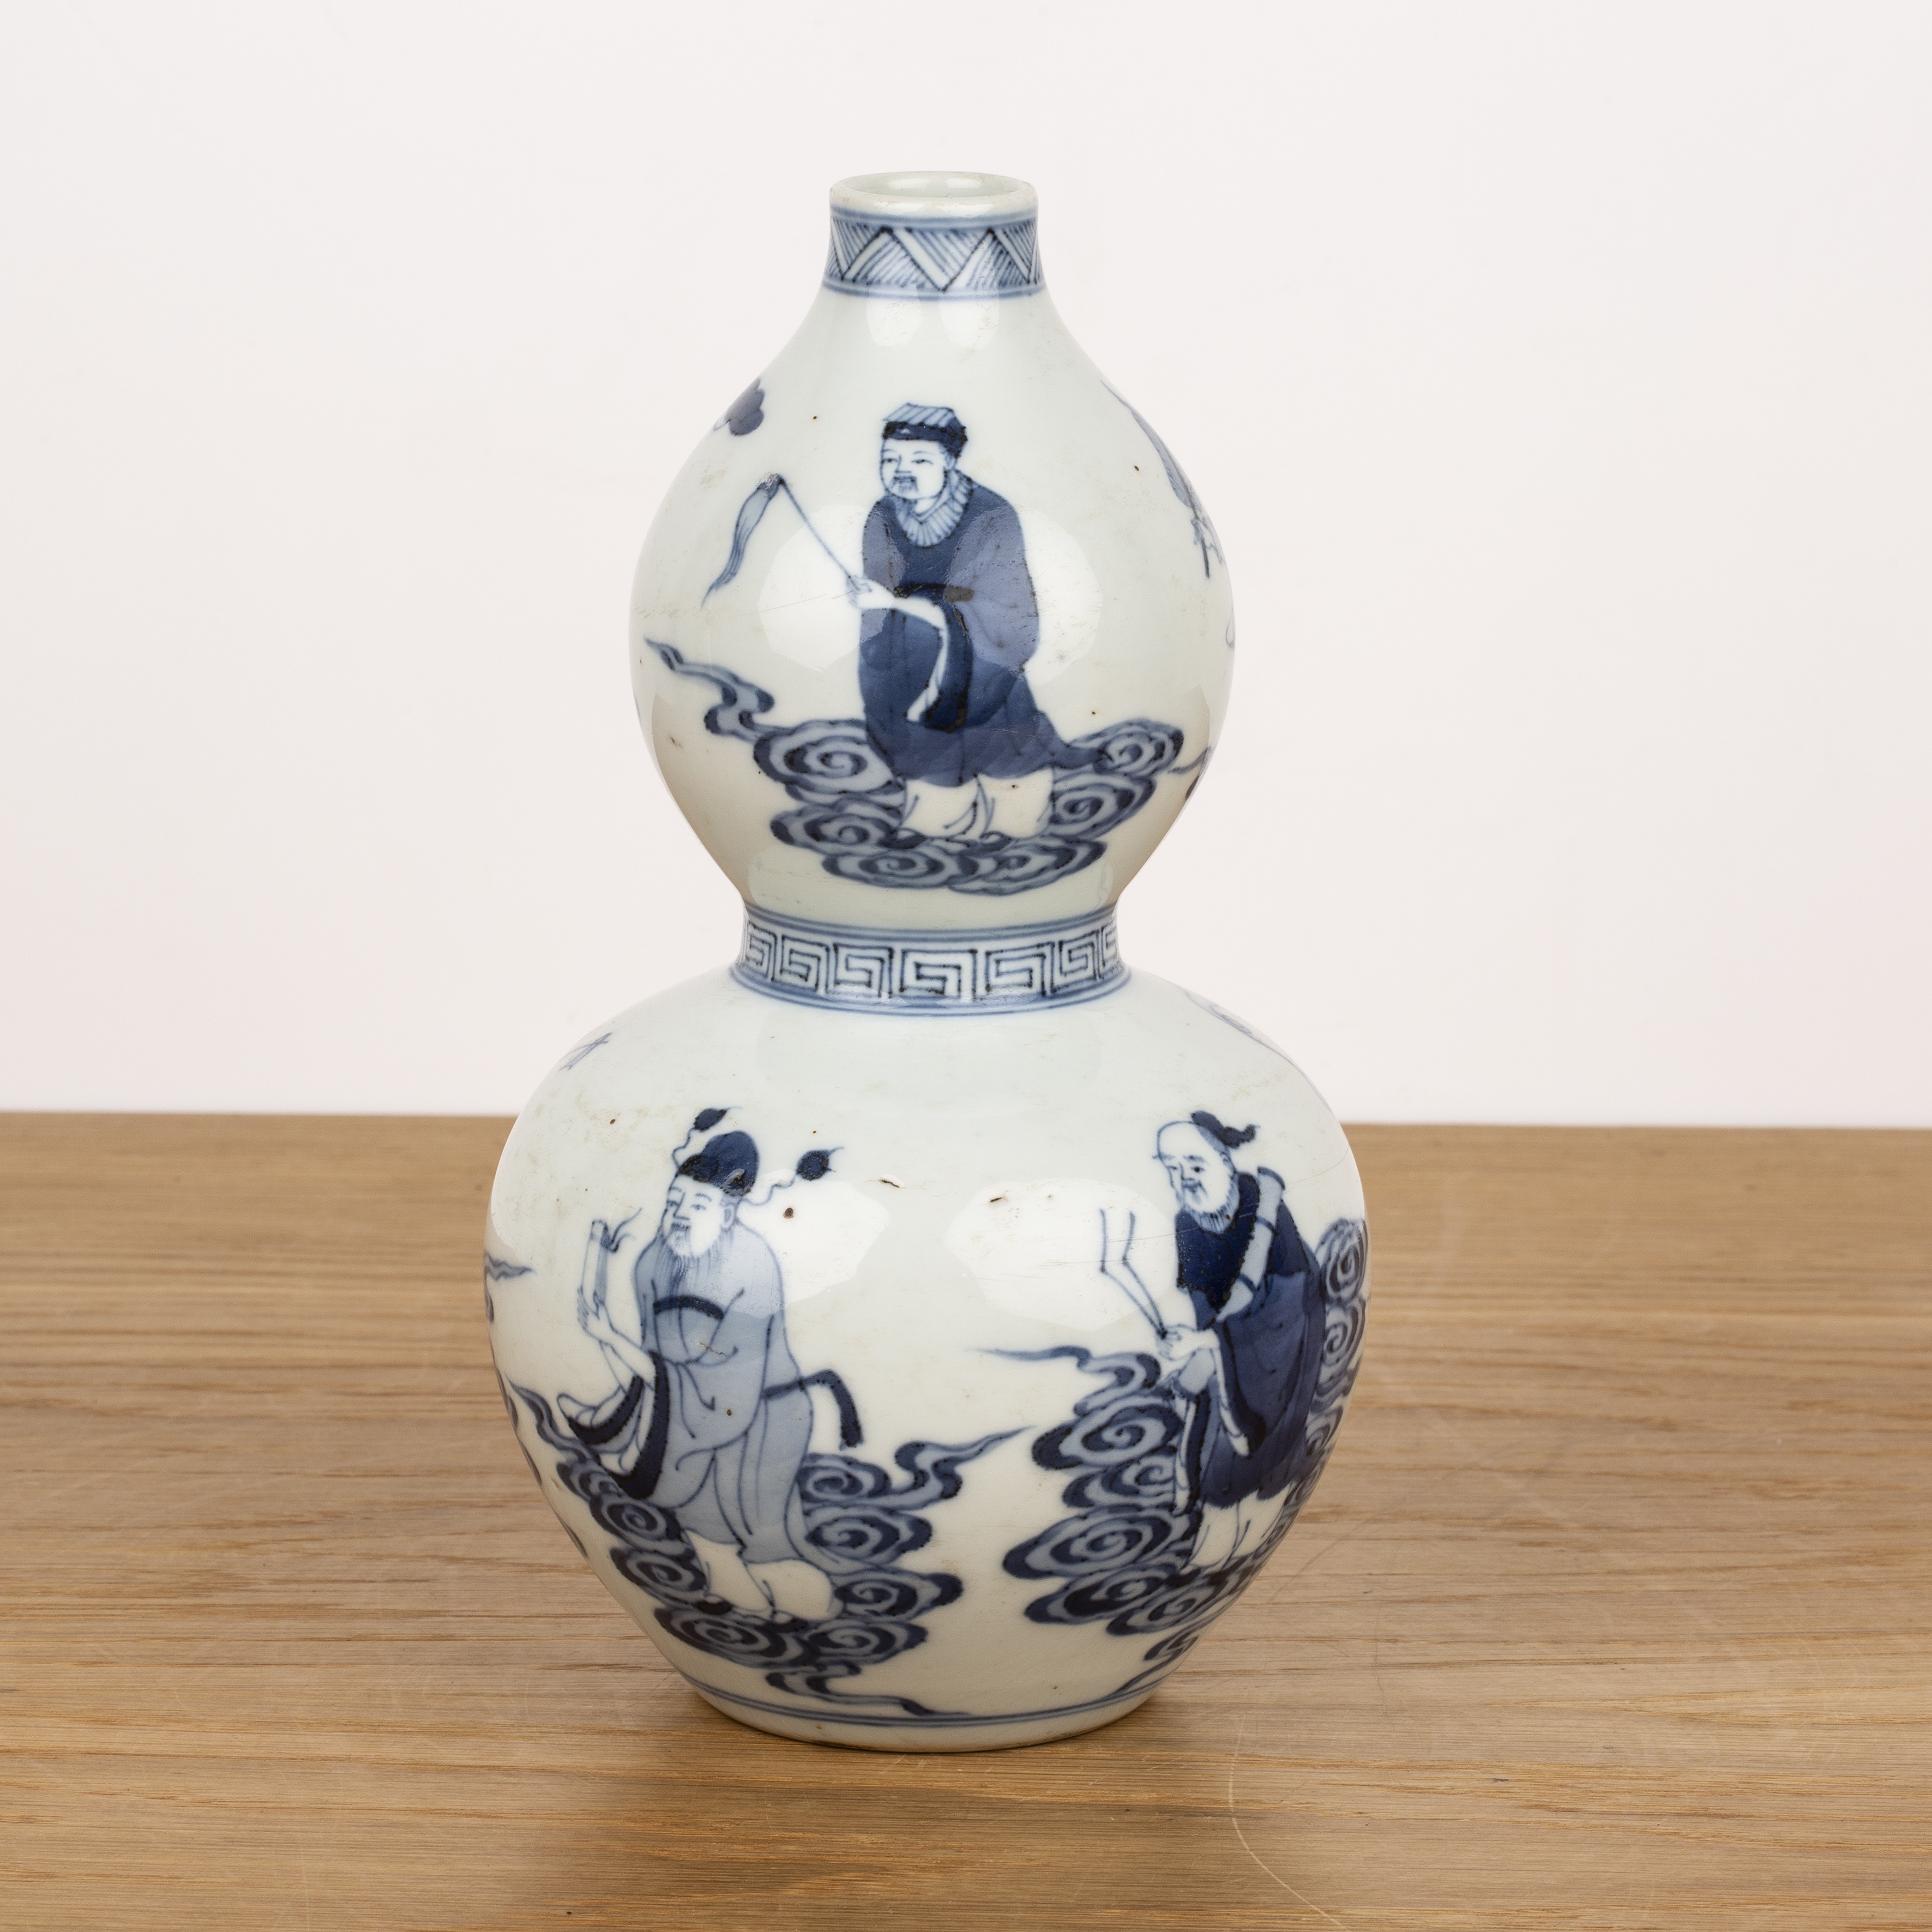 Double gourd blue and white vase Chinese, 19th Century painted with scholars, musicians above and - Image 2 of 4